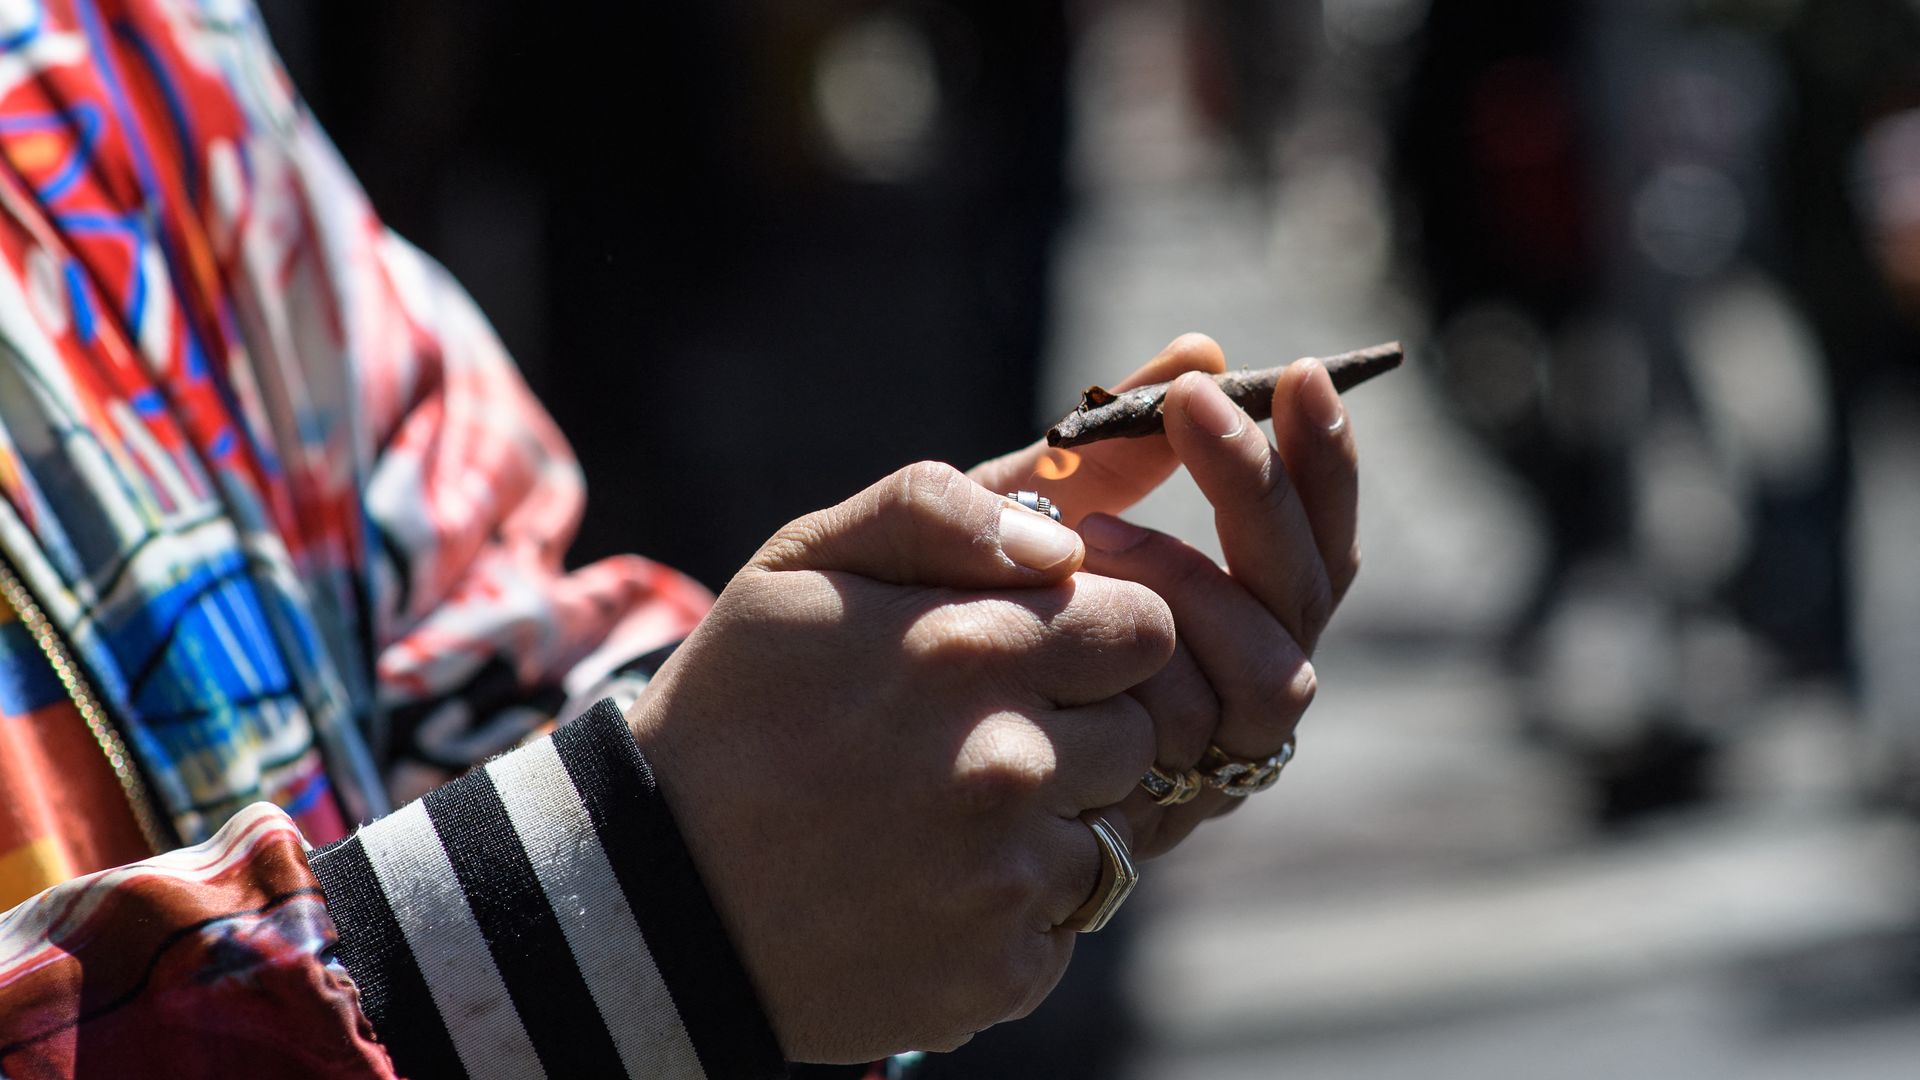 A person smoking a marijuana cigarette in New York City in May May 2021.